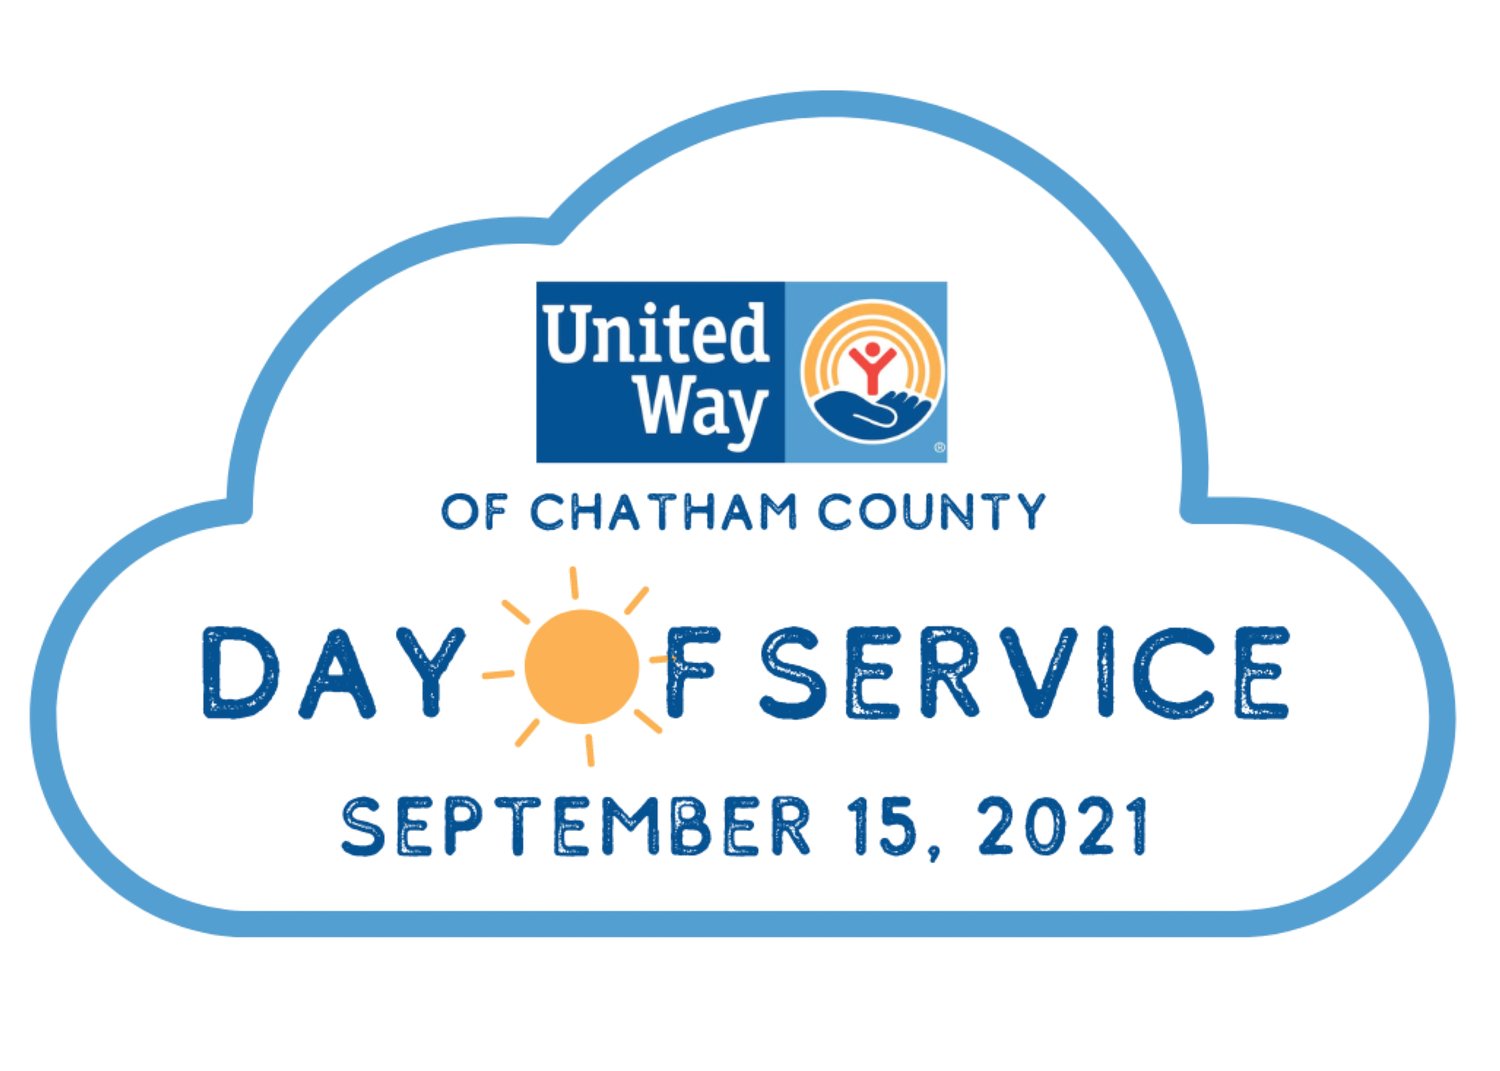 United Way's 'Day of Service' will be observed Sept. 15 in Chatham County.